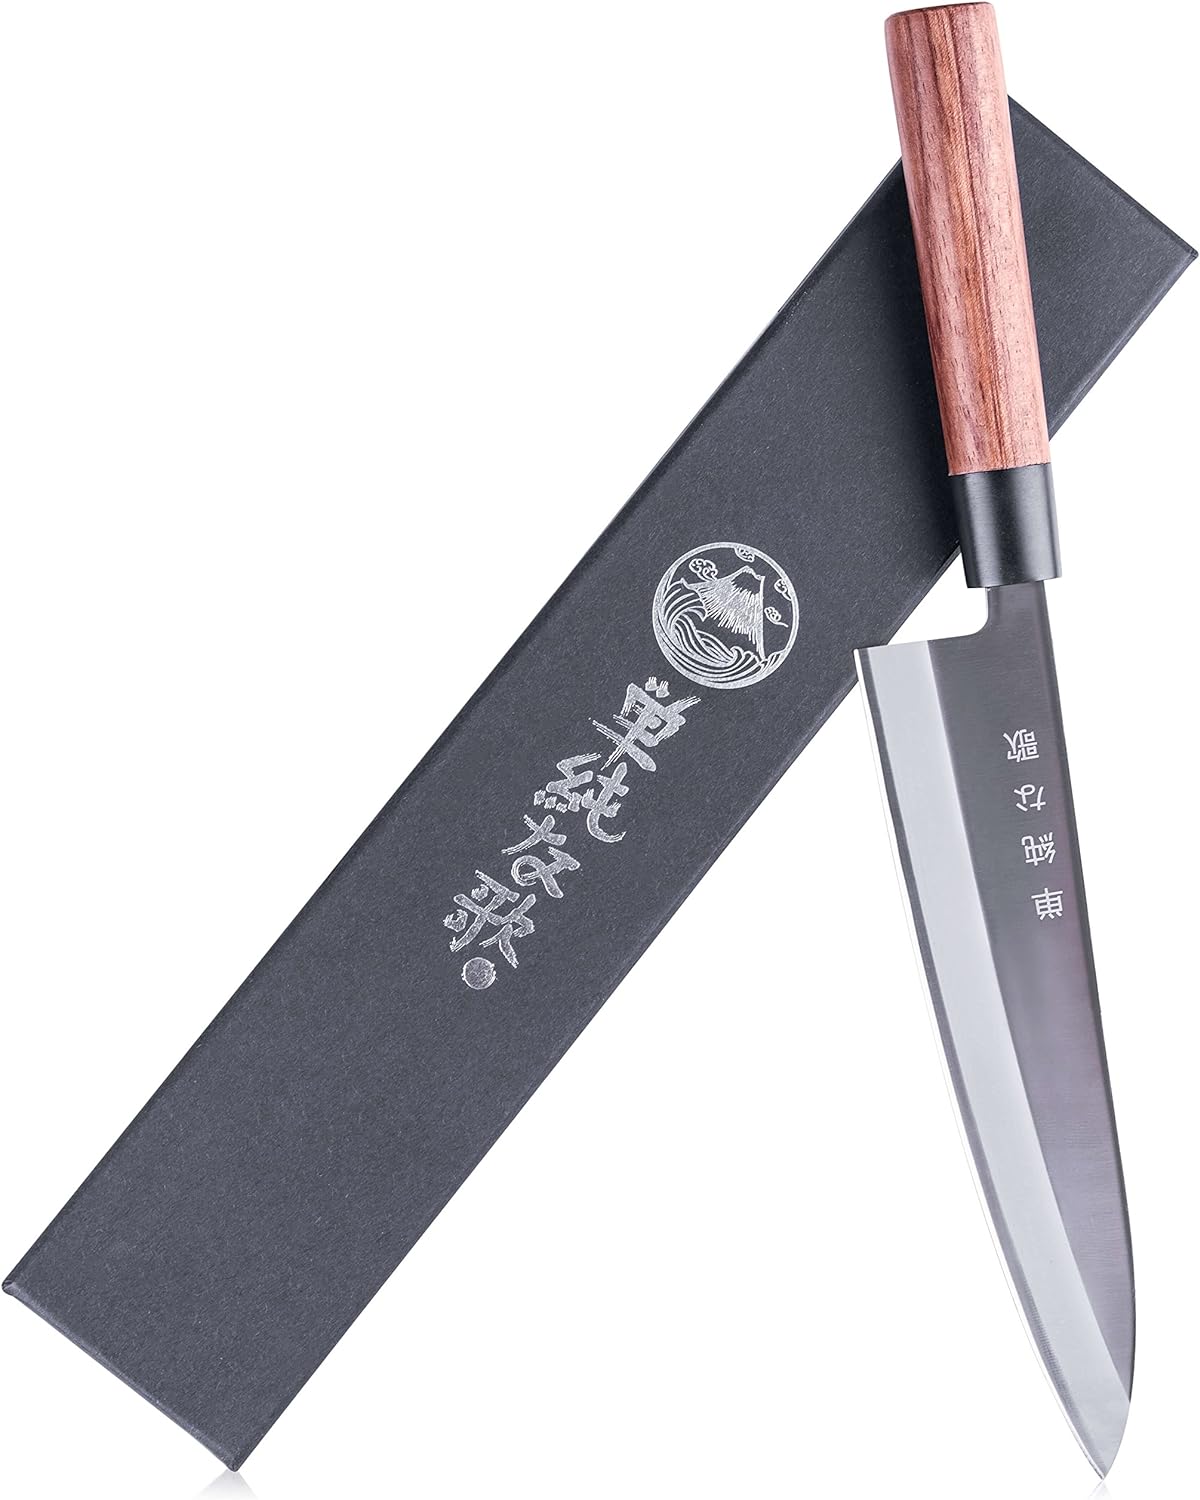 KD Japanese Sushi Knife Stainless Steel Chef's Knife